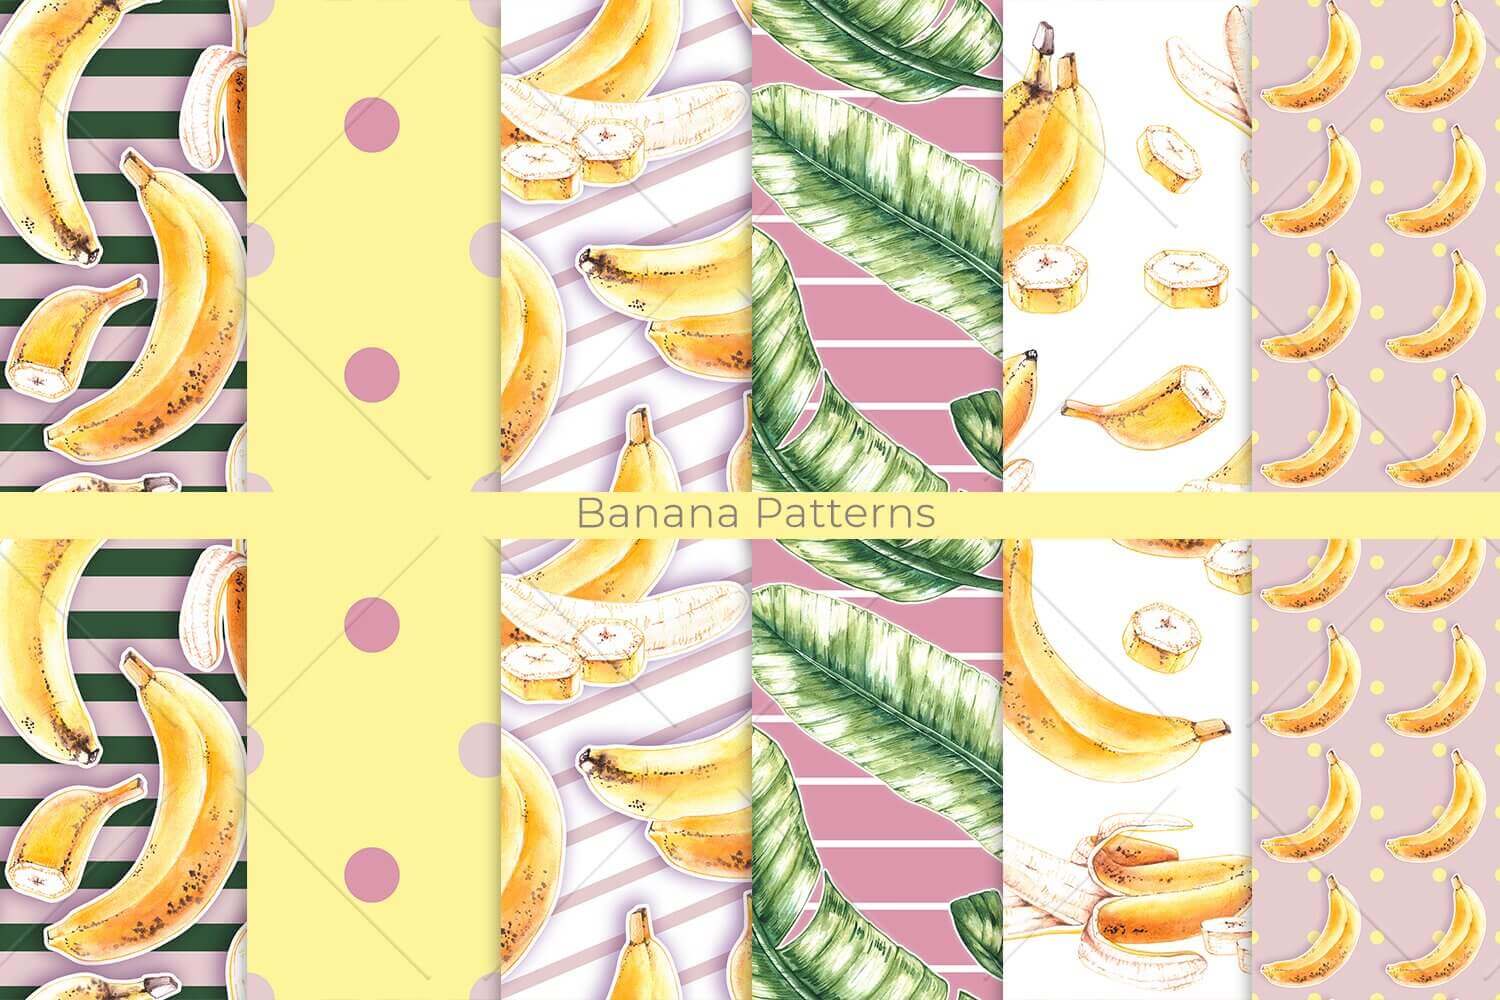 Yellow bananas on colored backgrounds.